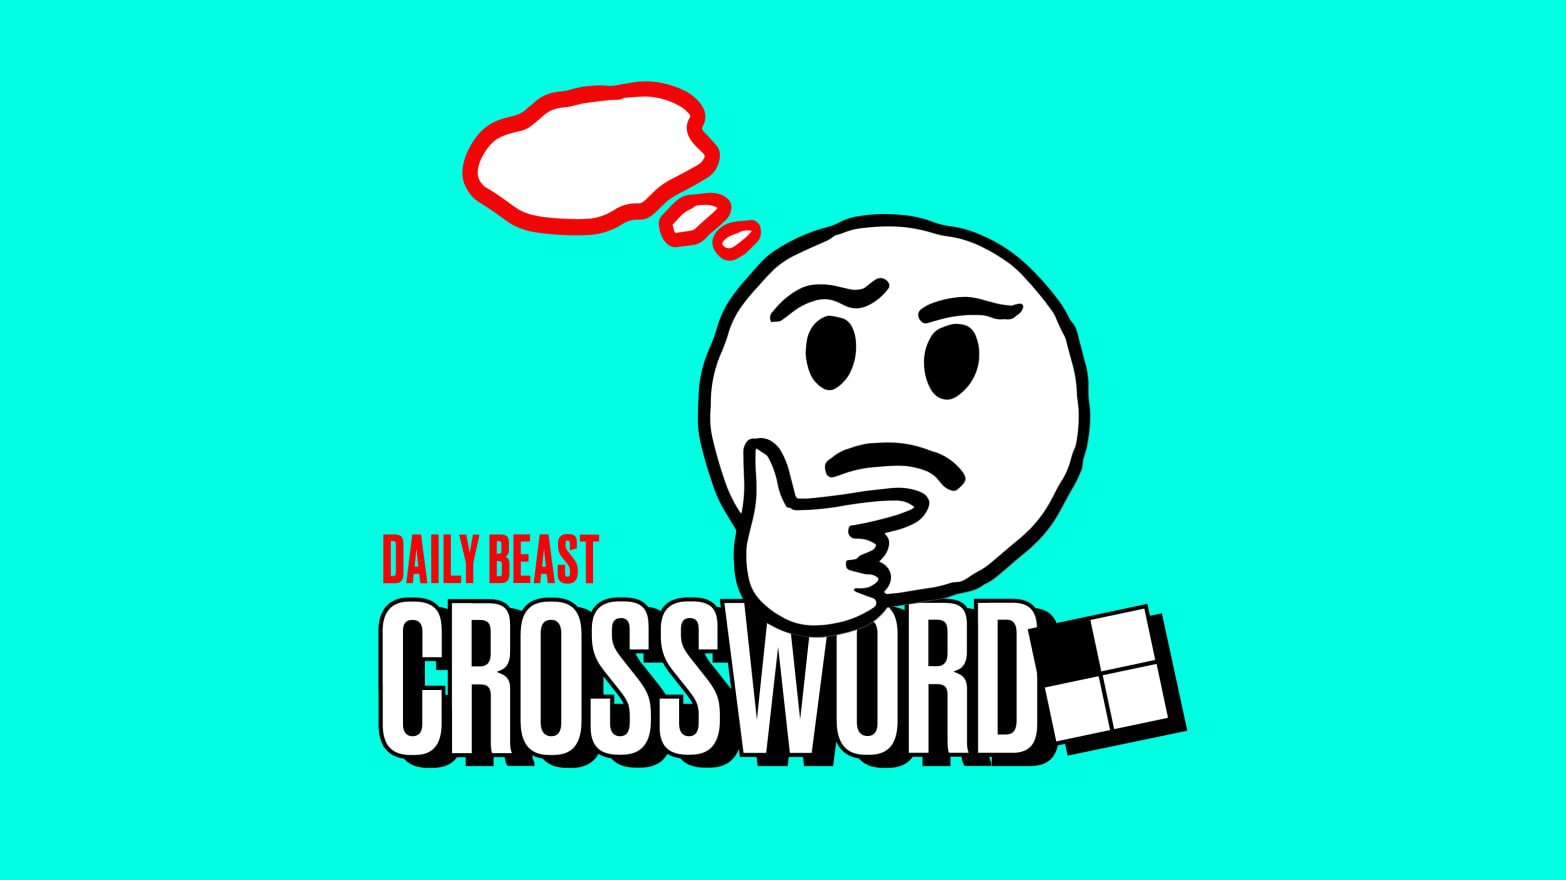 the-daily-beast-crossword-puzzle-creator-shares-a-tip-for-which-clues